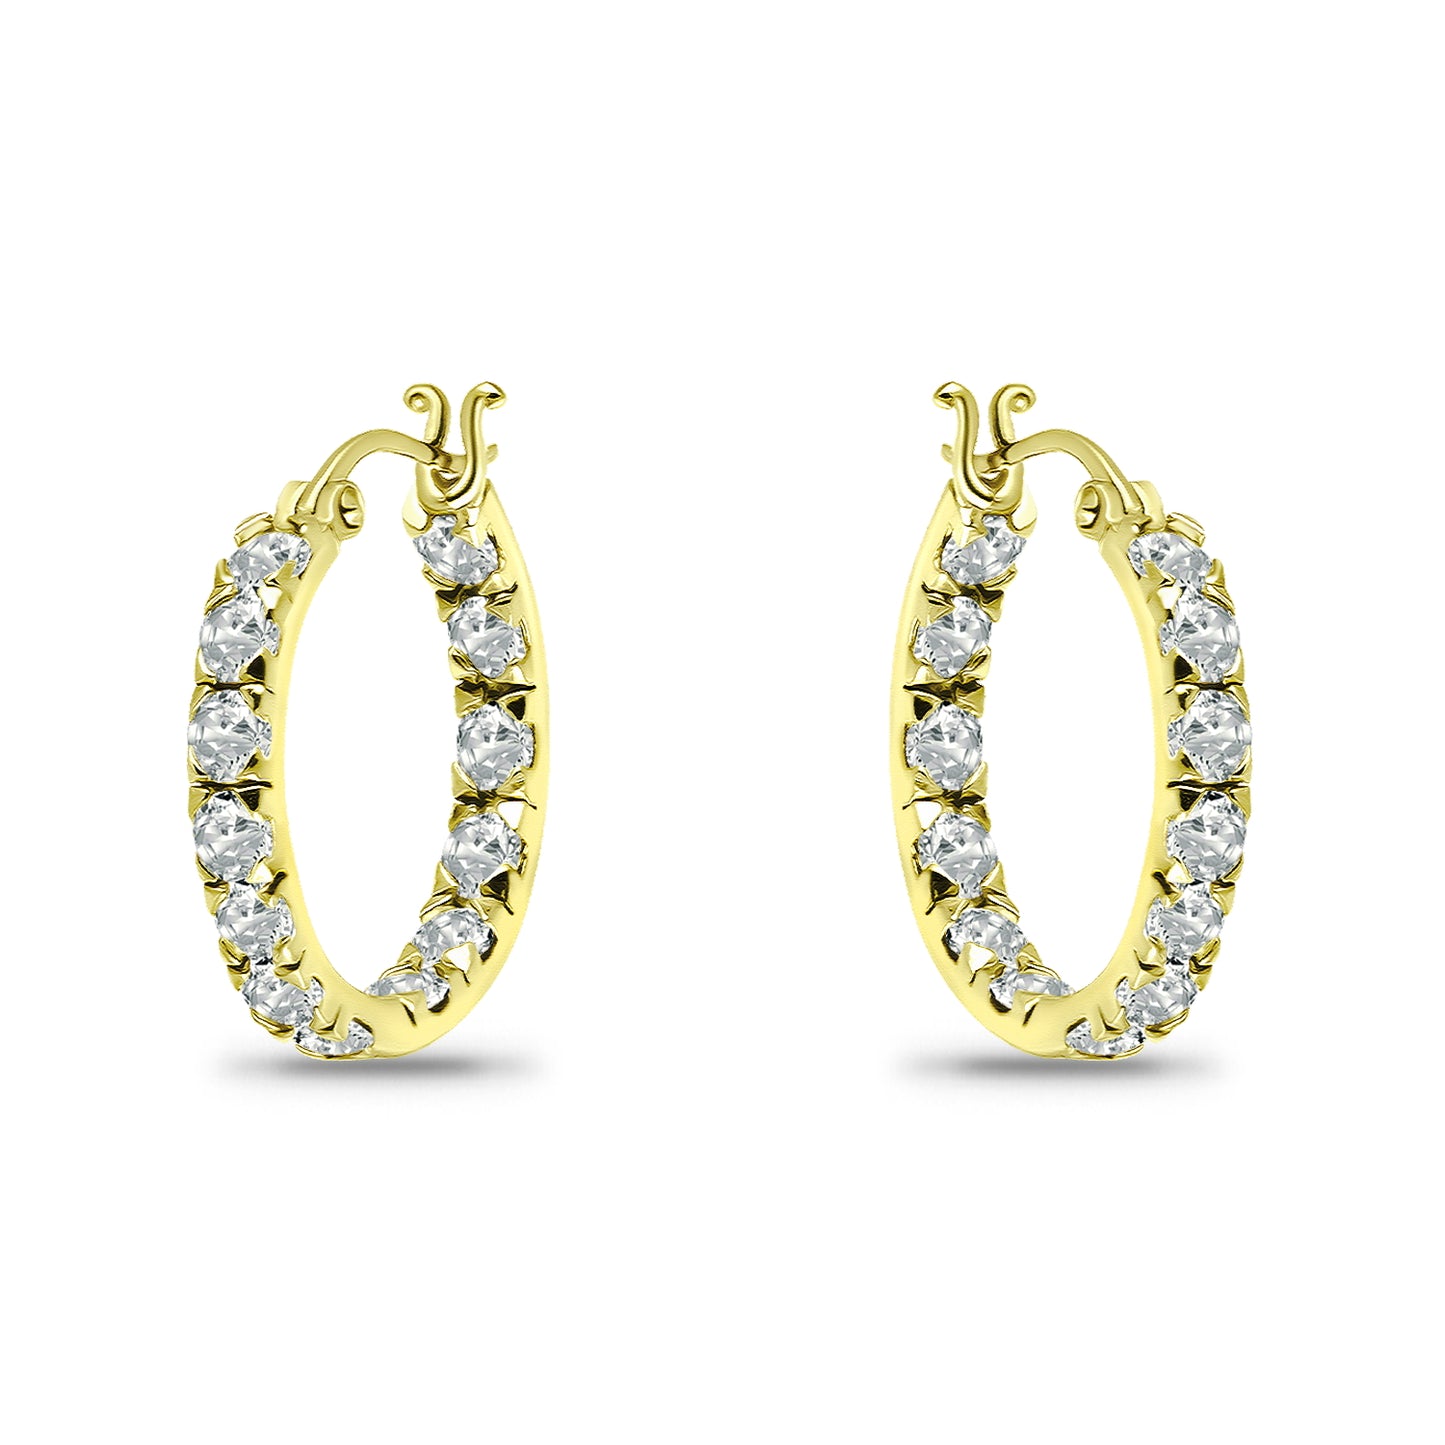 14K Gold Plated Cubic Zirconia Inside Out Hoop Earrings with Sterling Silver Posts